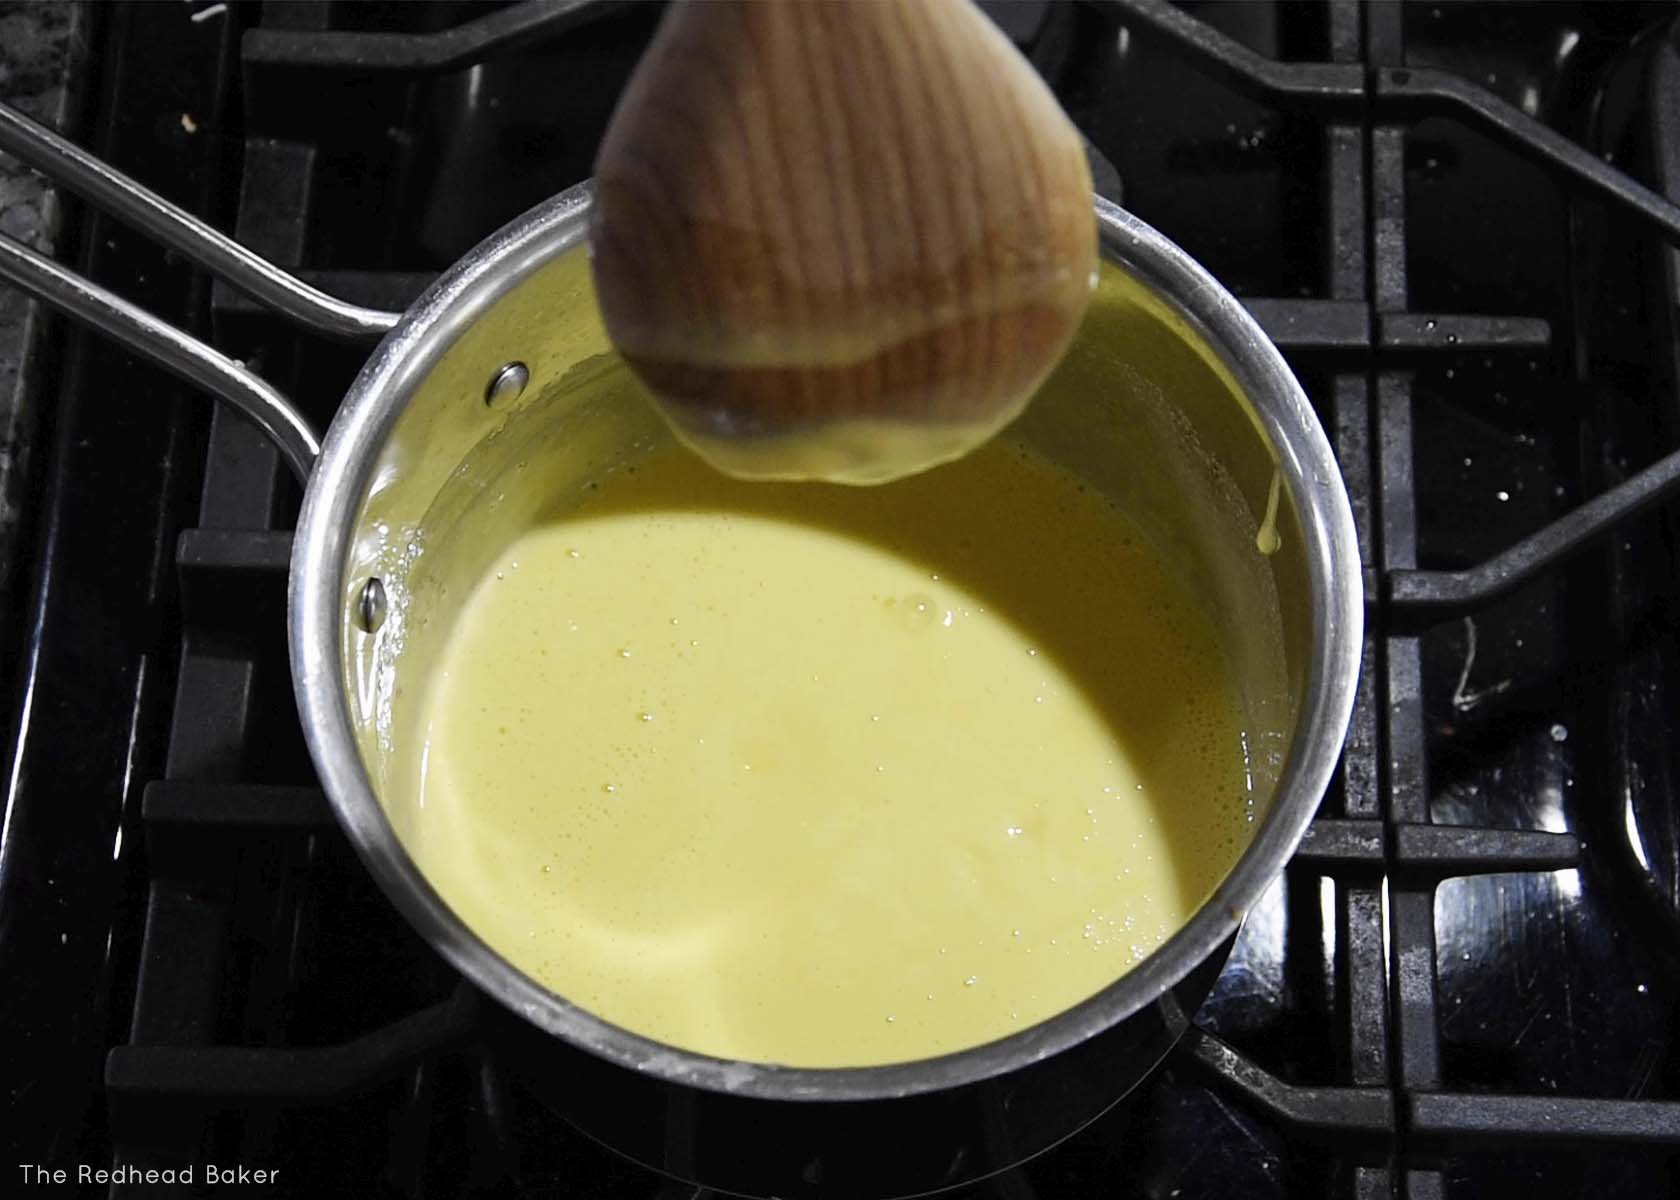 Properly cooked custard. The custard doesn't run when a finger is swiped across the back of the spoon.